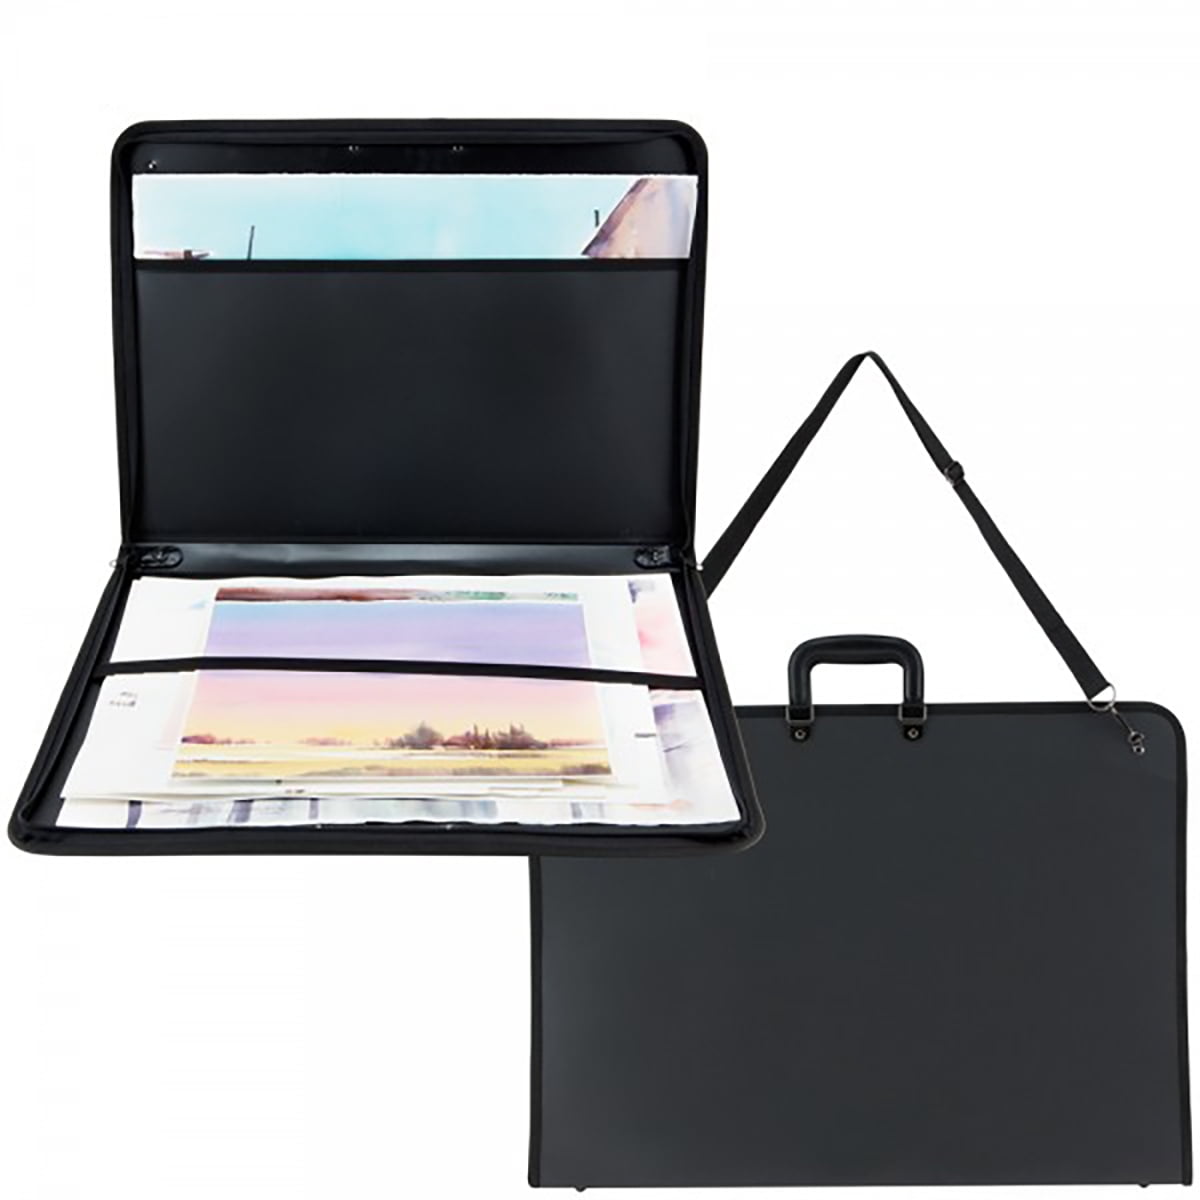 20 x 28 Inches Water Resistant 1st Place Products Professional Art Portfolio Case Light Weight & Durable Shoulder Strap & Handle Options Three Inside Pockets Documents Posters Monitors